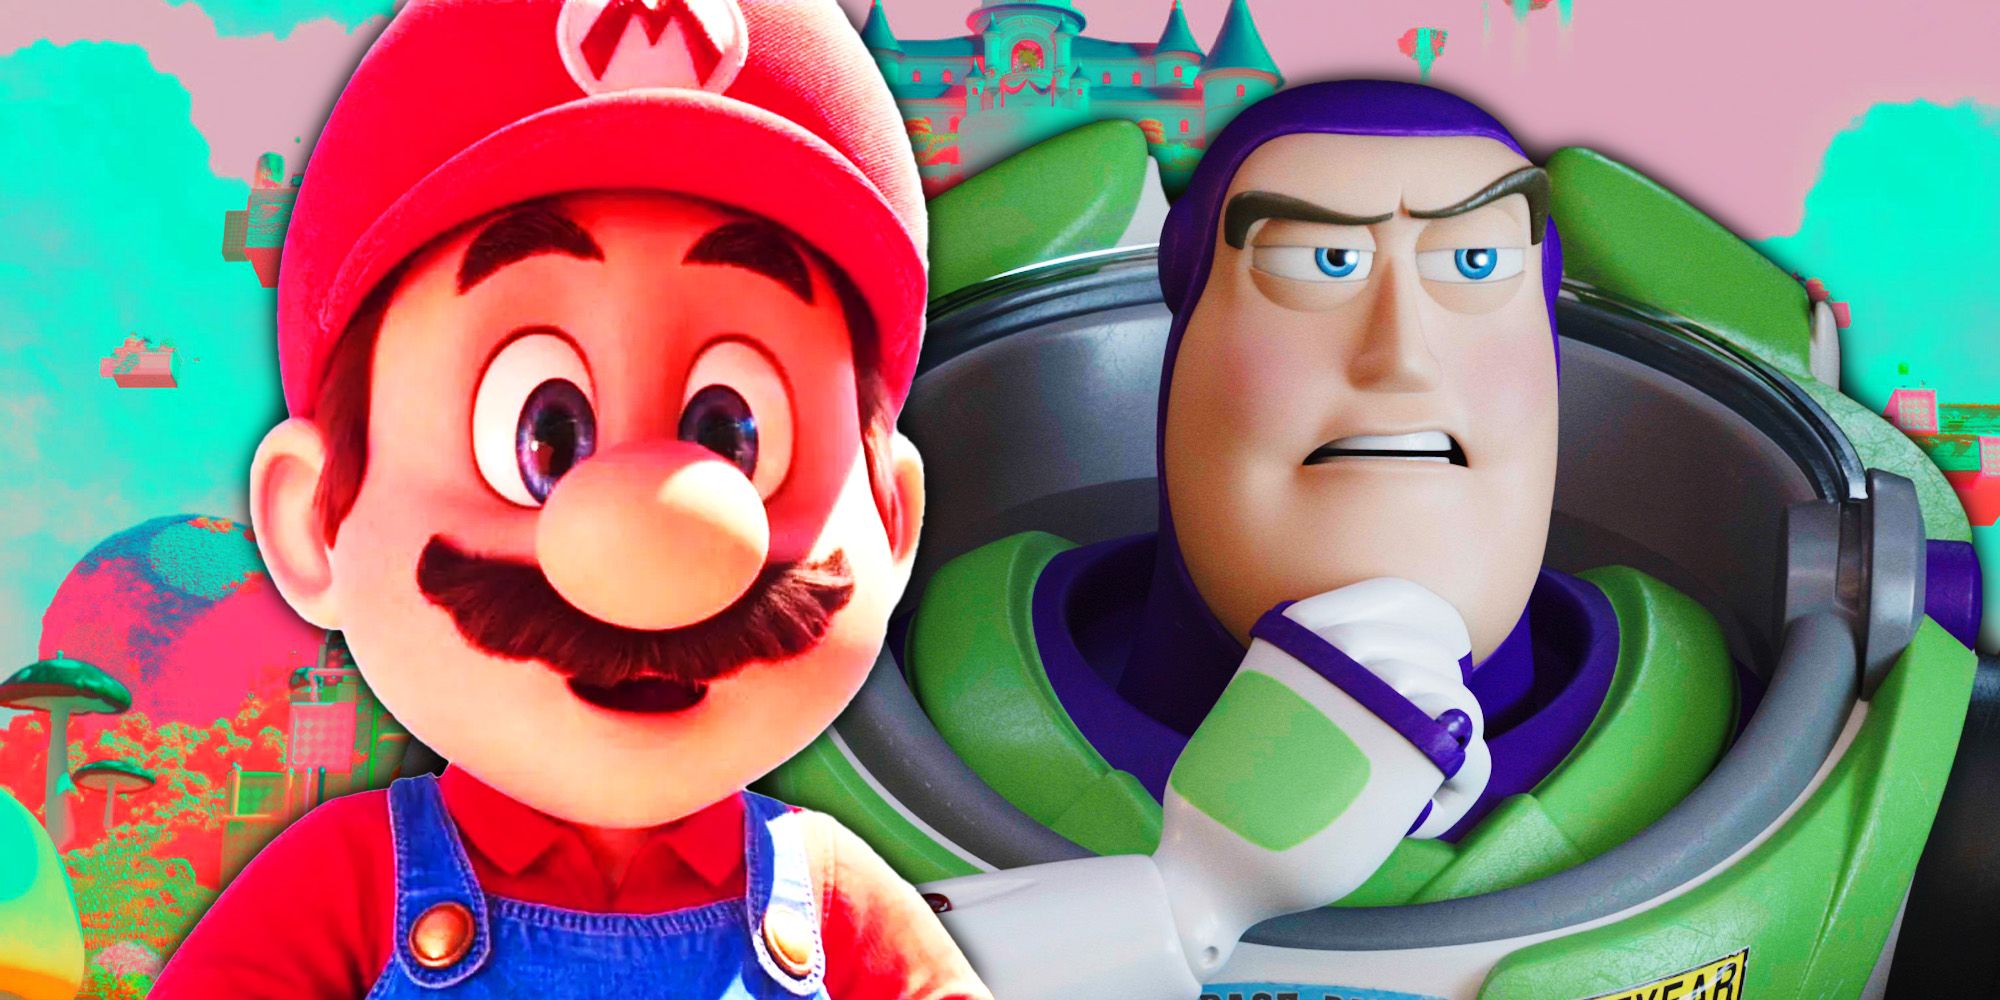 Mario from the 2023 movie with Buzz Lightyear from Toy Story 4